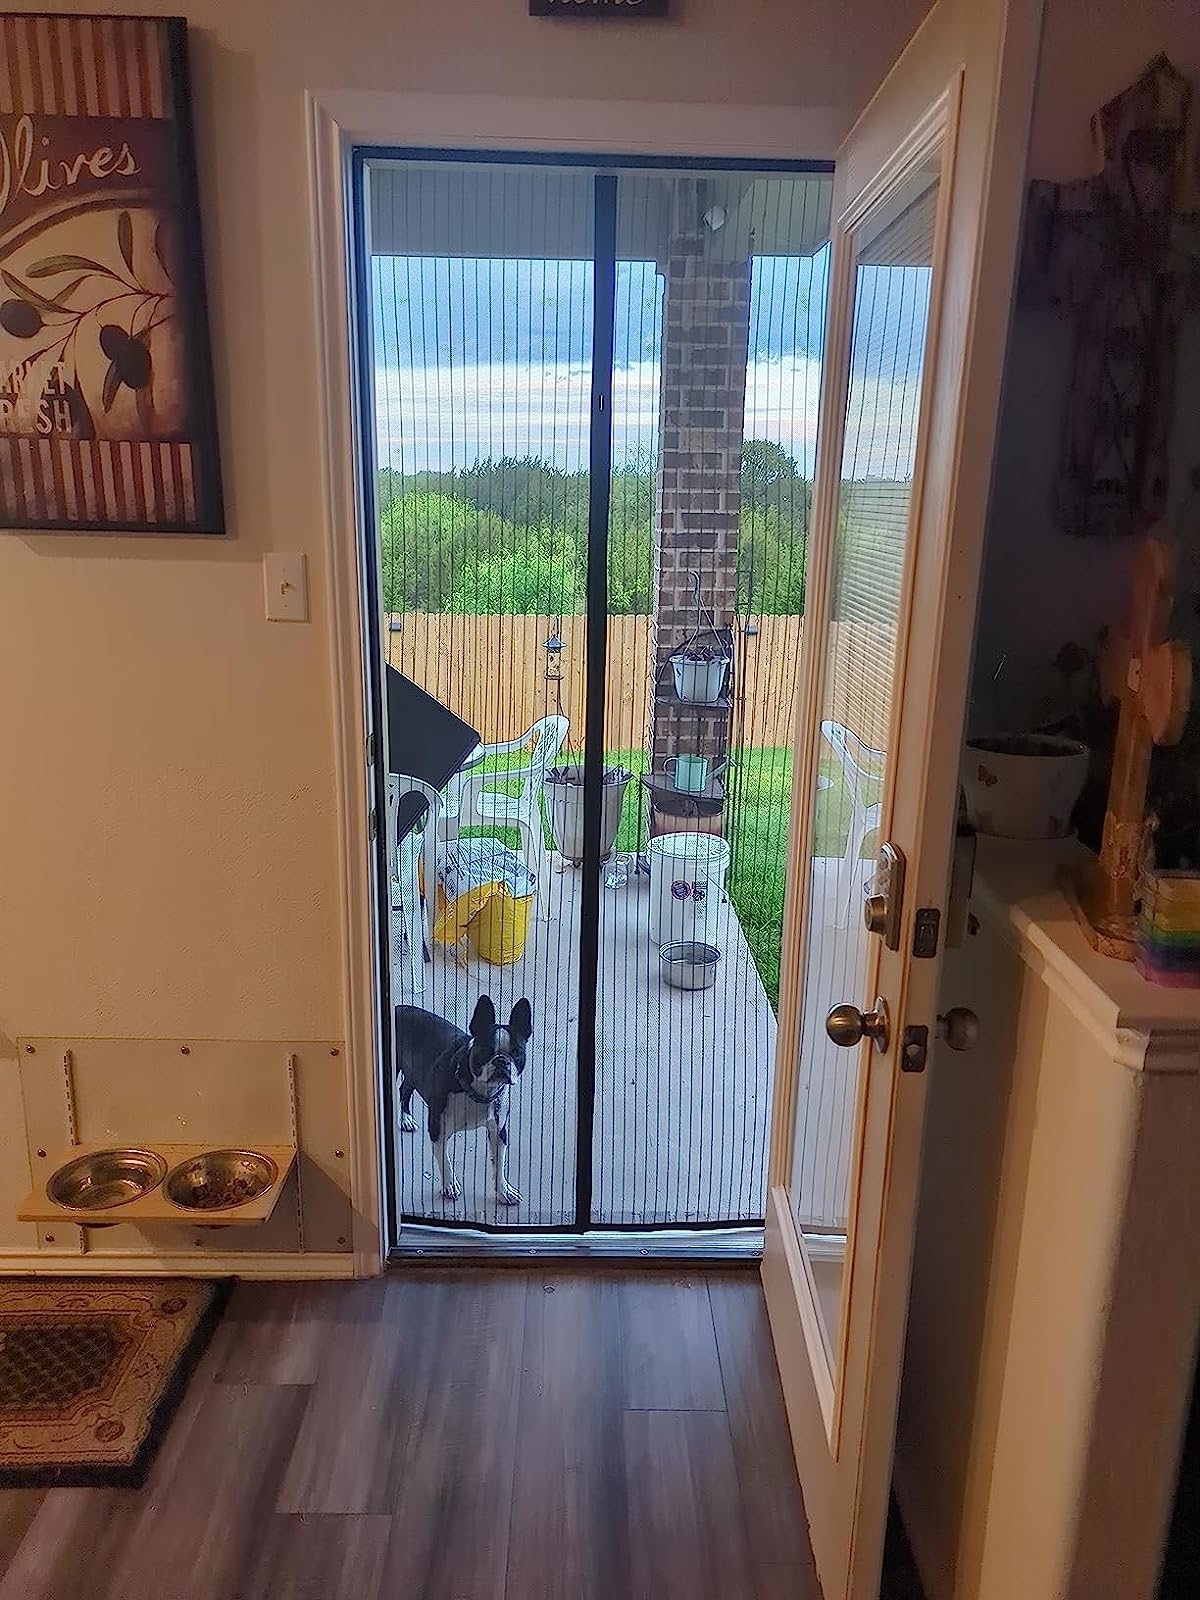 a reviewer photo of the magnetic screen door hanging in a door looking out on a decorated patio. a small dog is outside, looking in